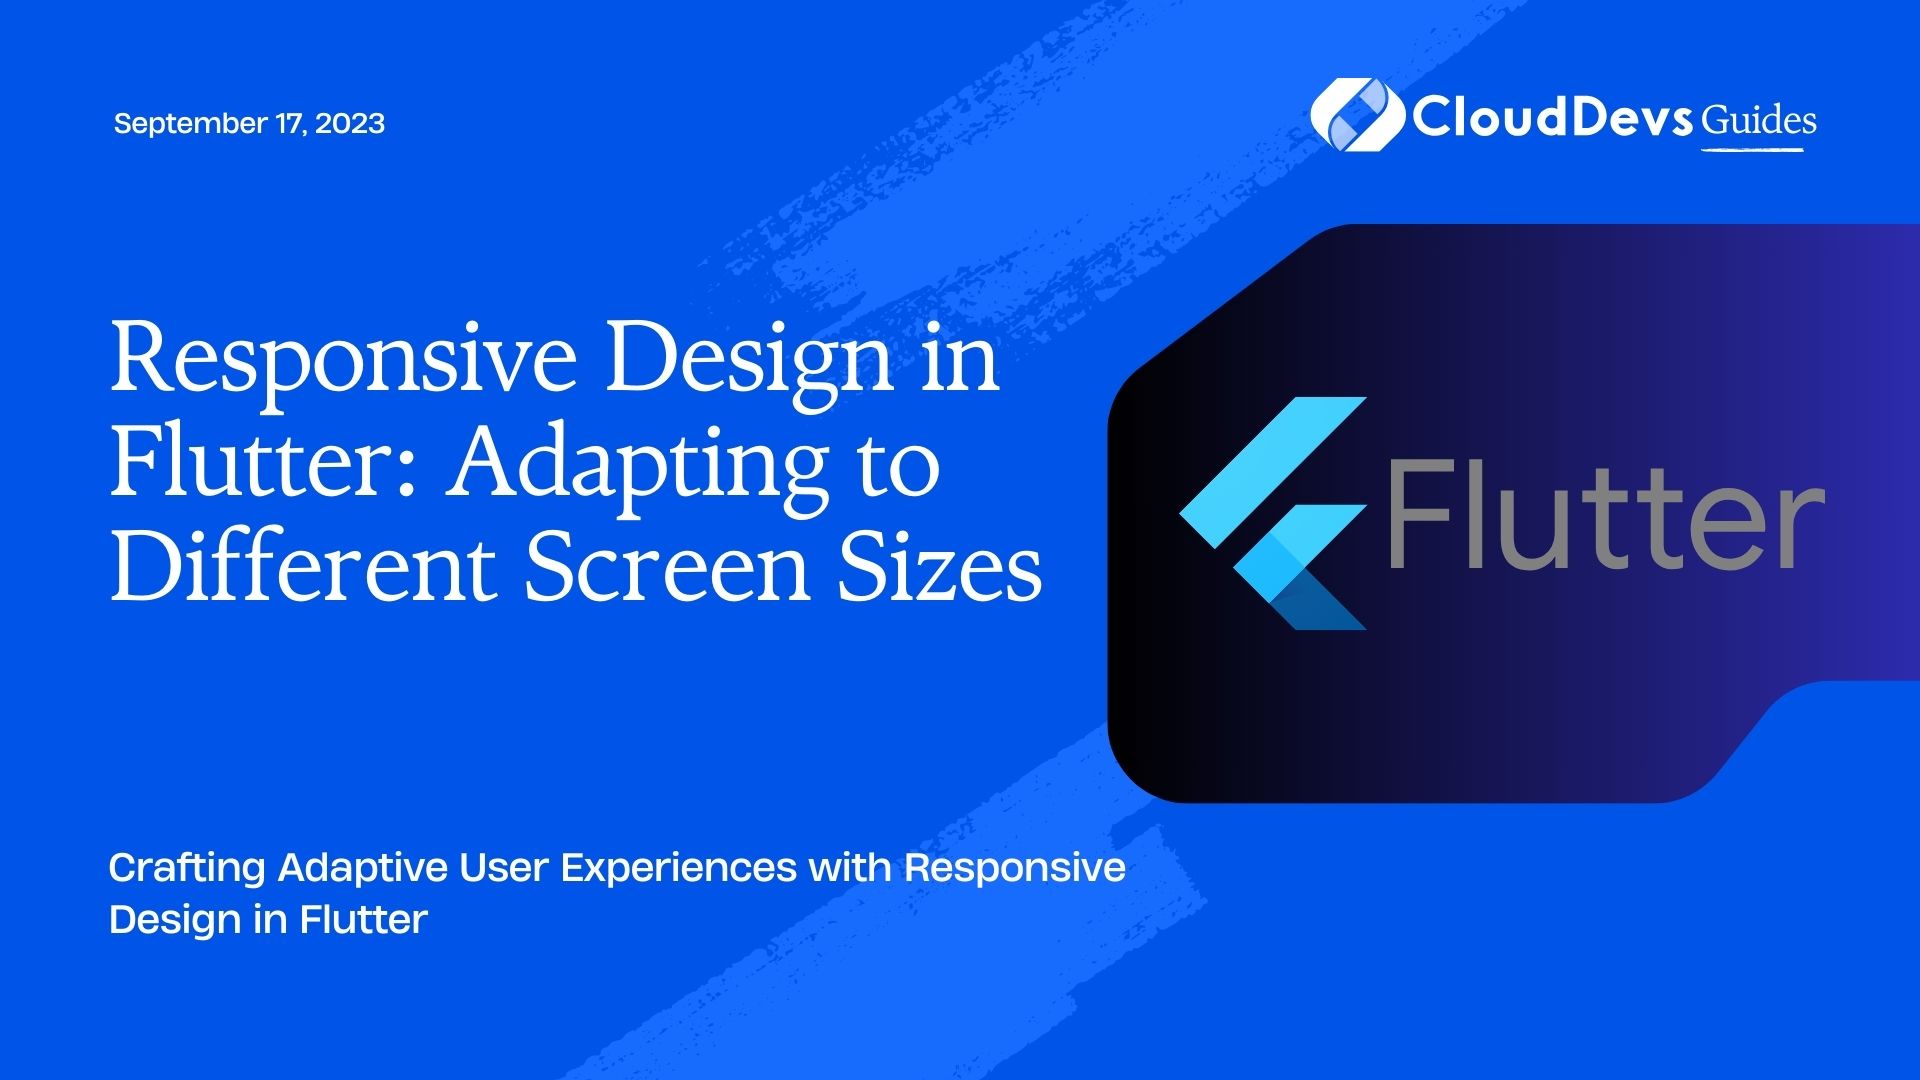 Responsive Design in Flutter: Adapting to Different Screen Sizes